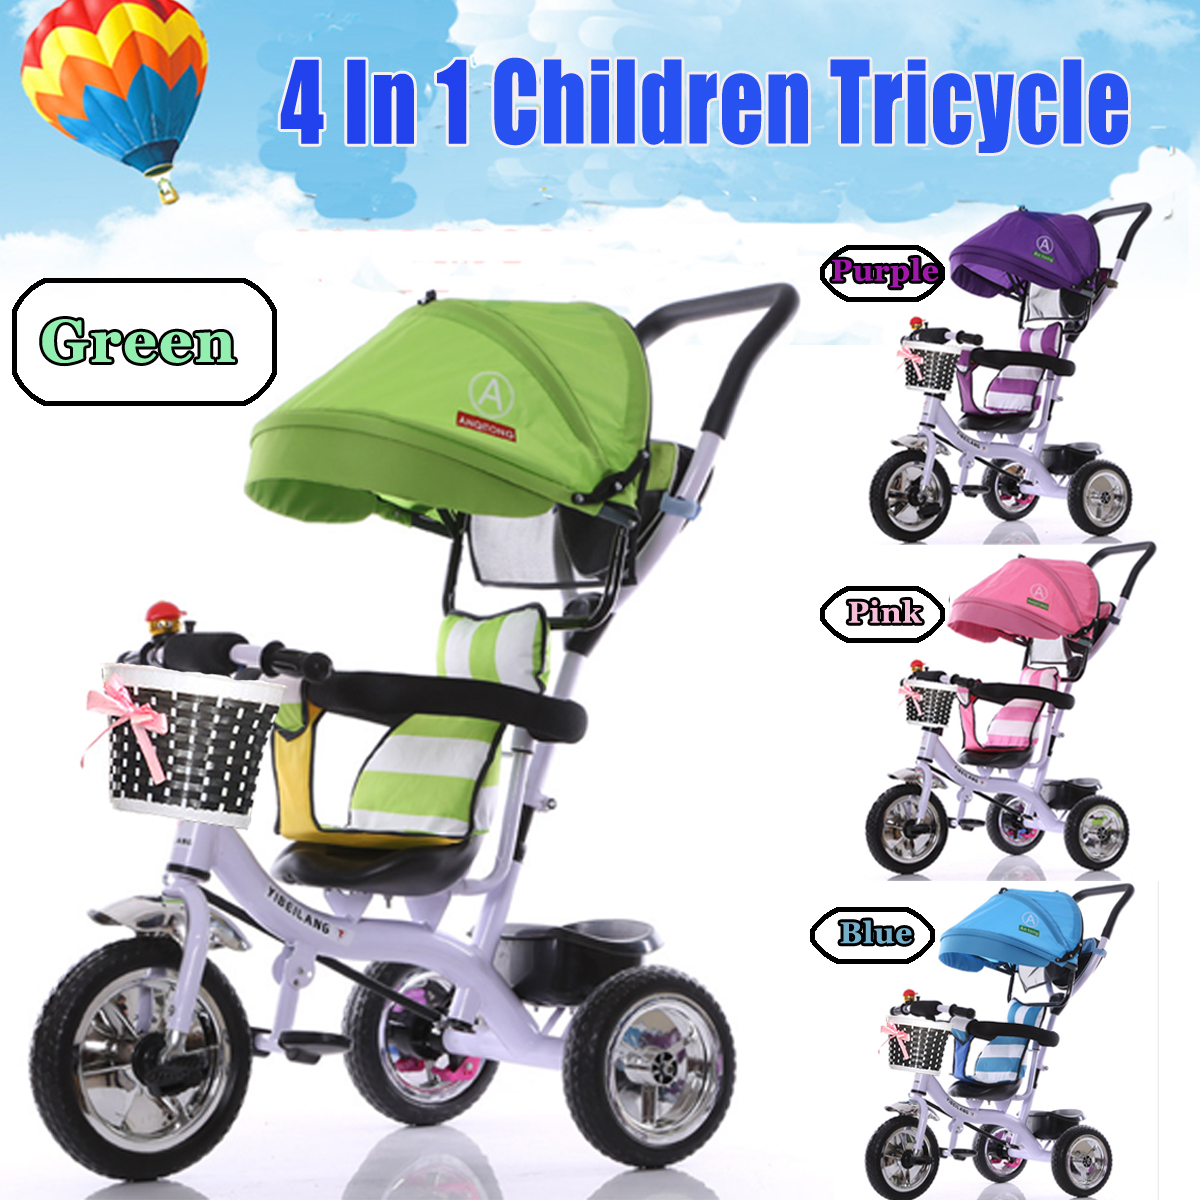 BIKIGHT-Kids-Tricycle-Bike-Children-3-Wheels-With-Shade-Toddler-Balance-Protection-Baby-Cholley-Mini-1340506